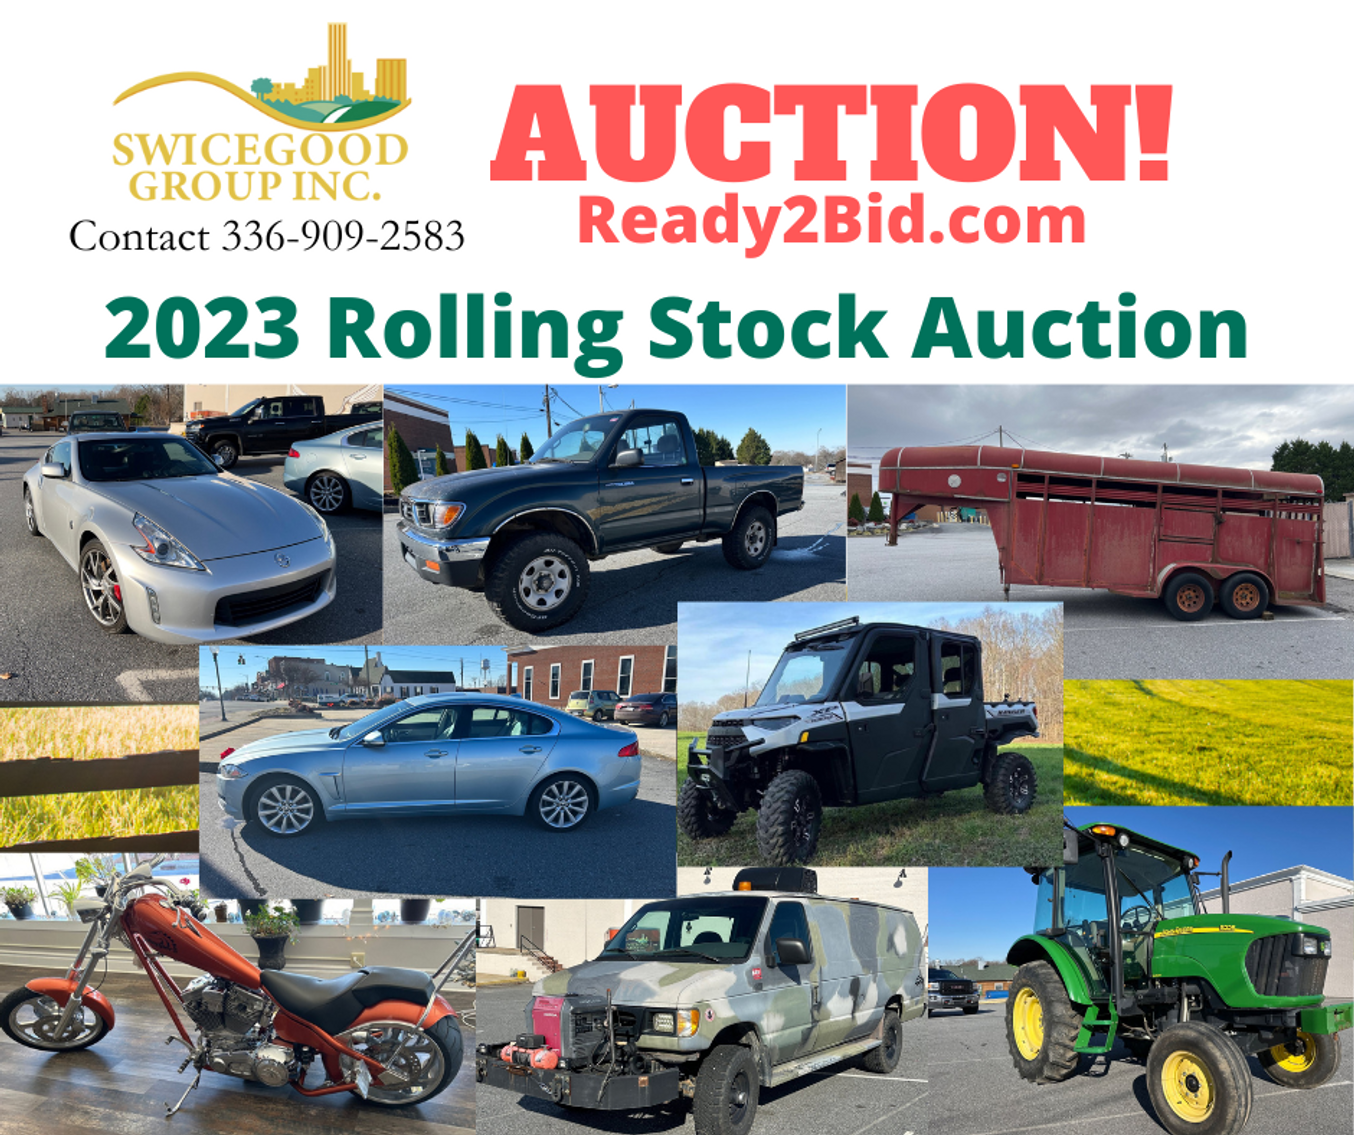 2023 Rolling Stock Auction